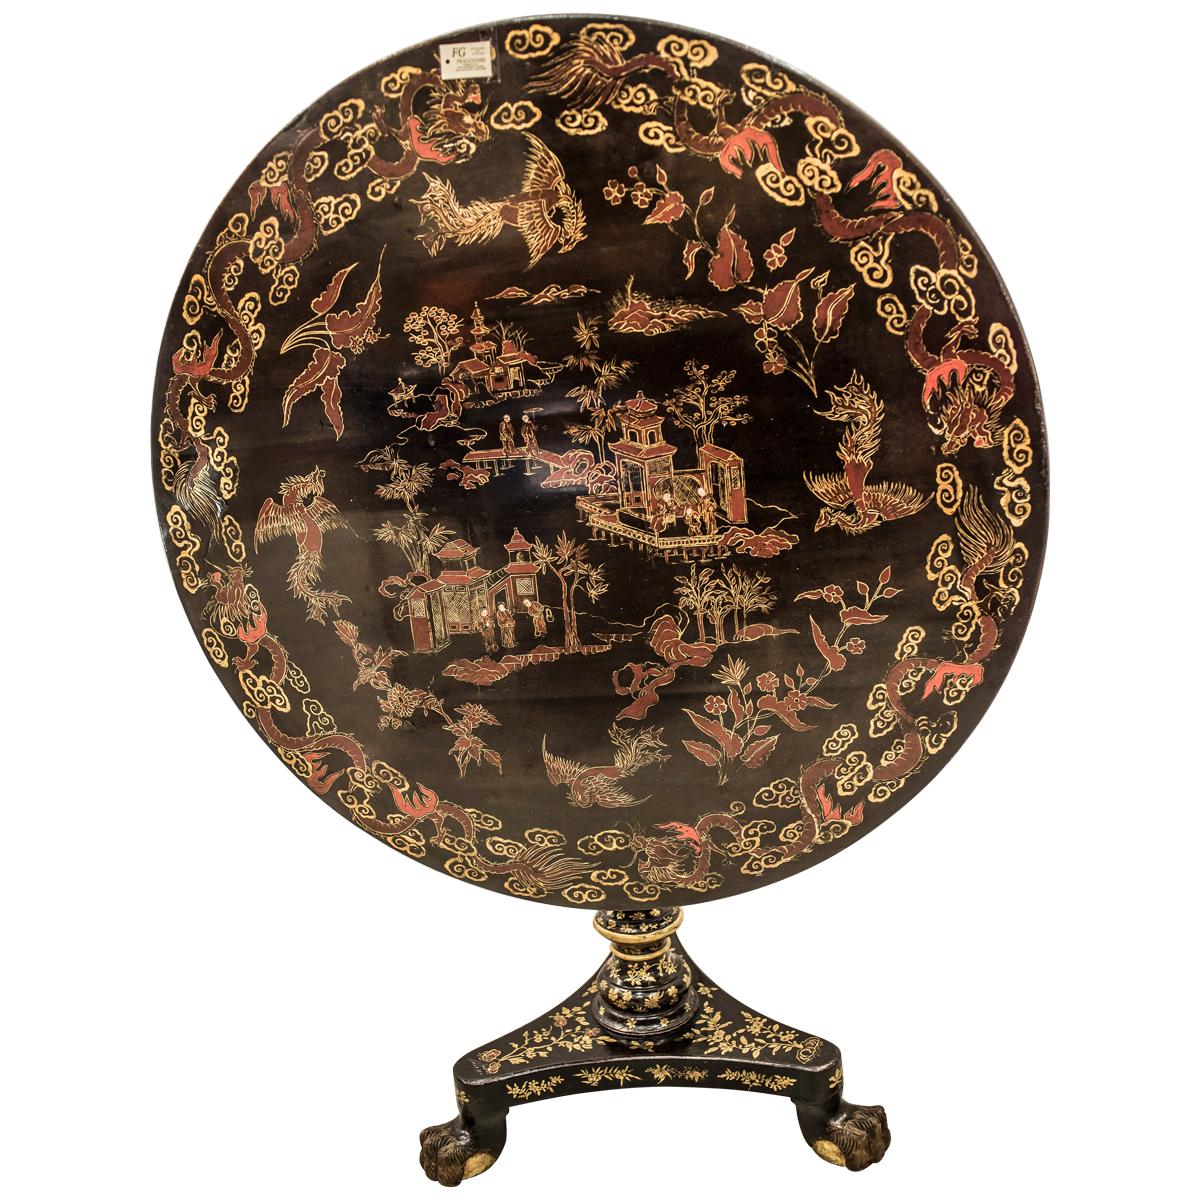 19th Century Tilt-Top Lacquered and Gilded Wood English Table with Chinoiseries